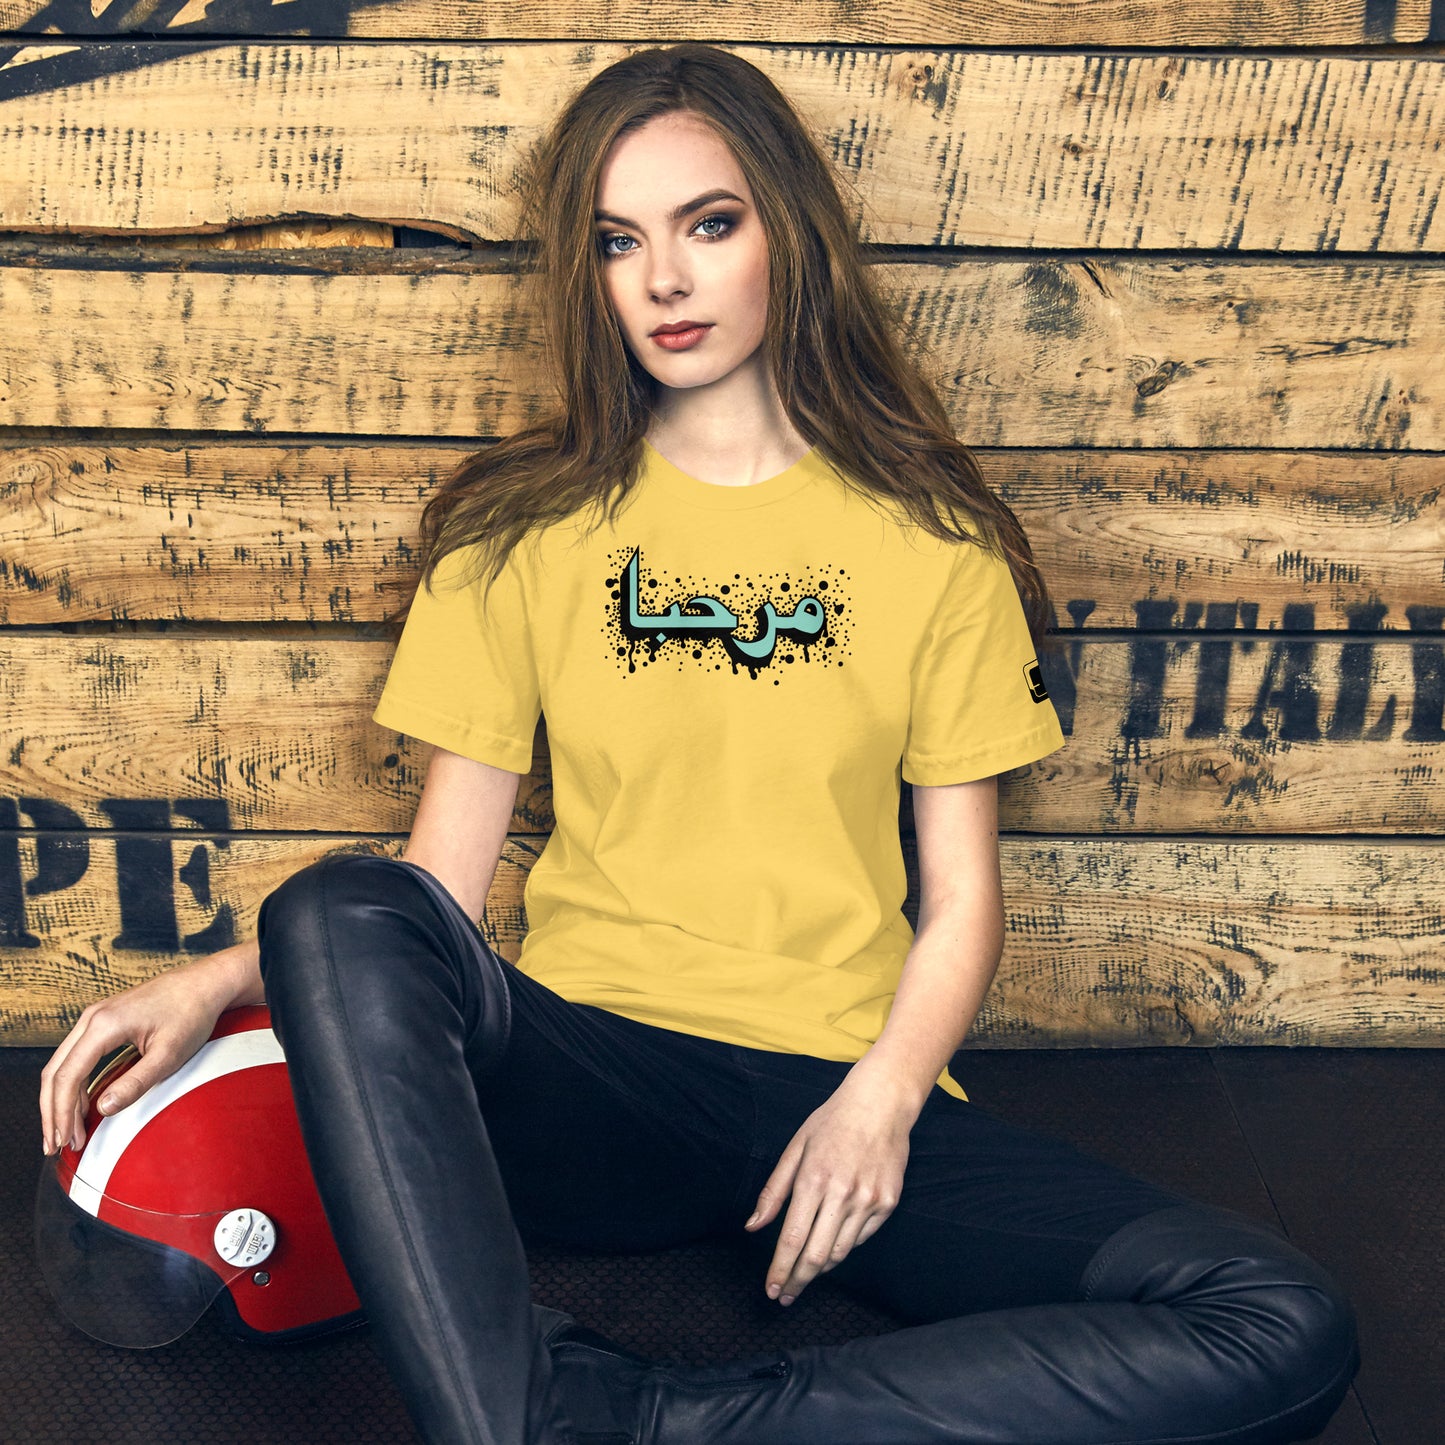 Woman with long hair sitting casually with a red helmet by her side, wearing a mustard yellow t-shirt featuring a turquoise graphic with Arabic calligraphy for "hello", paired with black pants, against a rustic wooden backdrop.